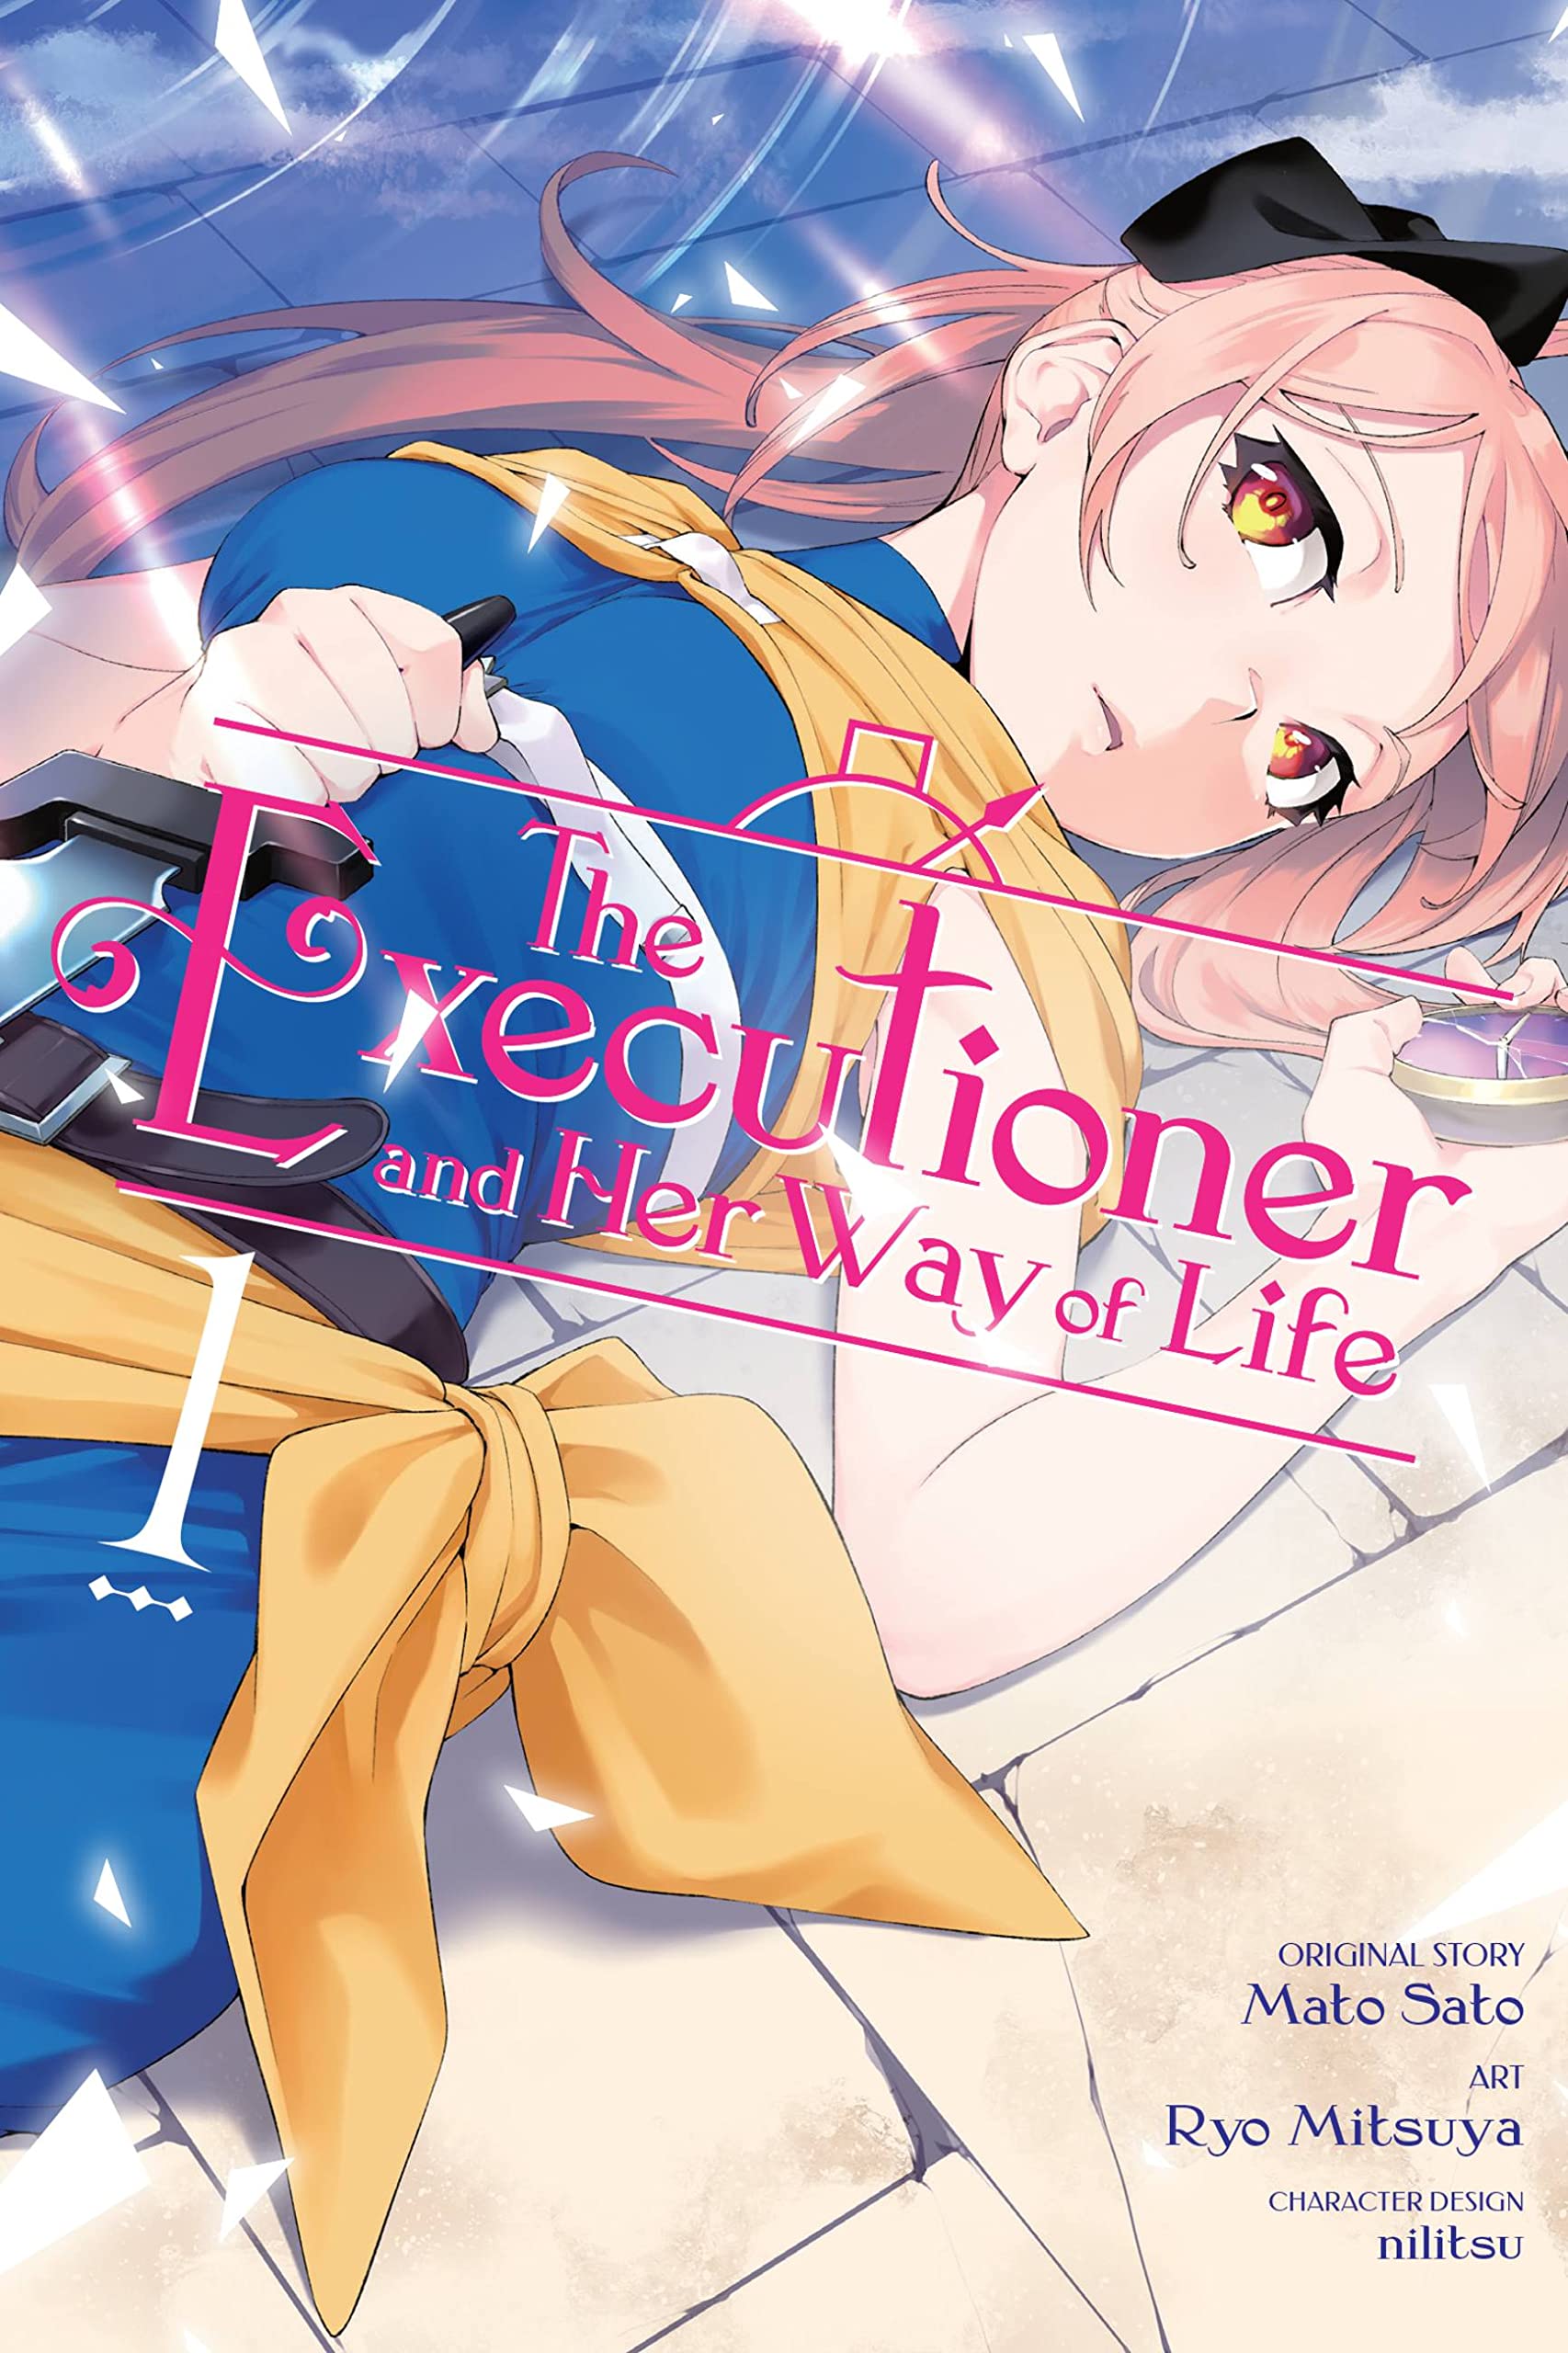 The Executioner and Her Way of Life” Anime Announced — Yuri Anime News 百合